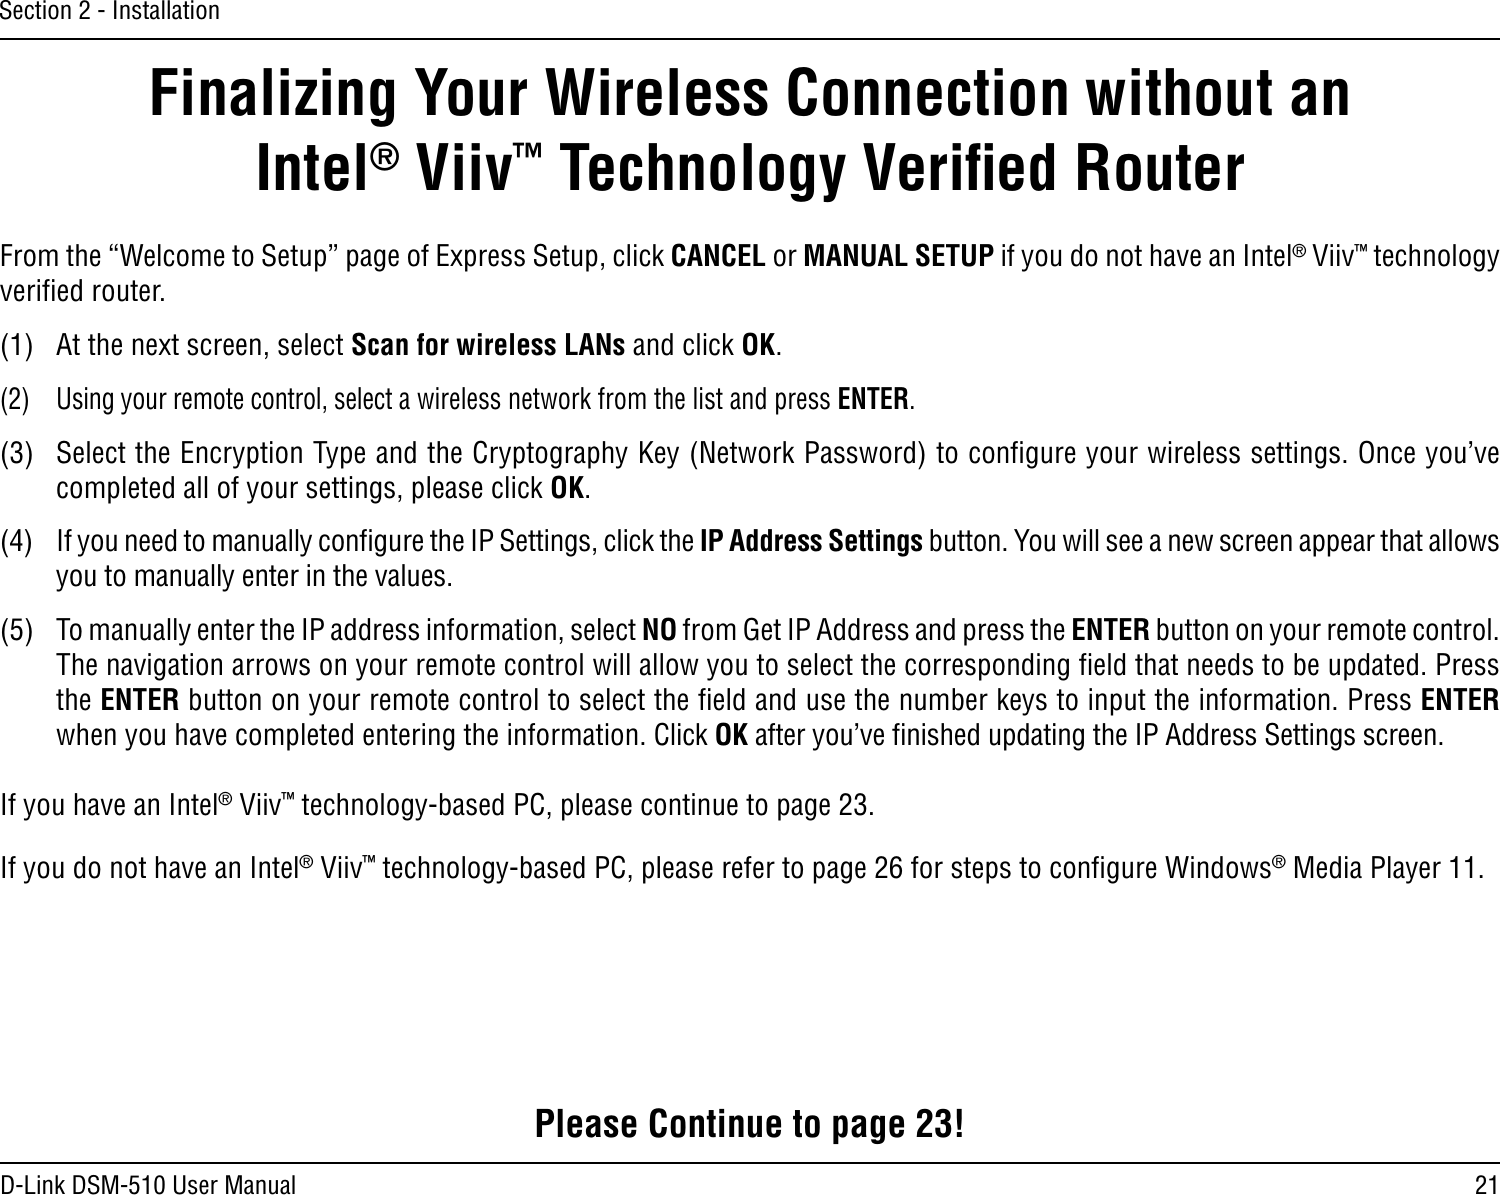 21D-Link DSM-510 User ManualSection 2 - InstallationFinalizing Your Wireless Connection without an  Intel® Viiv™ Technology Veriﬁed RouterFrom the “Welcome to Setup” page of Express Setup, click CANCEL or MANUAL SETUP if you do not have an Intel® Viiv™ technology veriﬁed router. (1)  At the next screen, select Scan for wireless LANs and click OK.(2)  Using your remote control, select a wireless network from the list and press ENTER.(3)  Select the Encryption Type and the Cryptography Key (Network Password) to conﬁgure your wireless settings. Once you’ve completed all of your settings, please click OK.(4)  If you need to manually conﬁgure the IP Settings, click the IP Address Settings button. You will see a new screen appear that allows you to manually enter in the values. (5)  To manually enter the IP address information, select NO from Get IP Address and press the ENTER button on your remote control. The navigation arrows on your remote control will allow you to select the corresponding ﬁeld that needs to be updated. Press the ENTER button on your remote control to select the ﬁeld and use the number keys to input the information. Press ENTER when you have completed entering the information. Click OK after you’ve ﬁnished updating the IP Address Settings screen.If you have an Intel® Viiv™ technology-based PC, please continue to page 23.If you do not have an Intel® Viiv™ technology-based PC, please refer to page 26 for steps to conﬁgure Windows® Media Player 11.Please Continue to page 23!